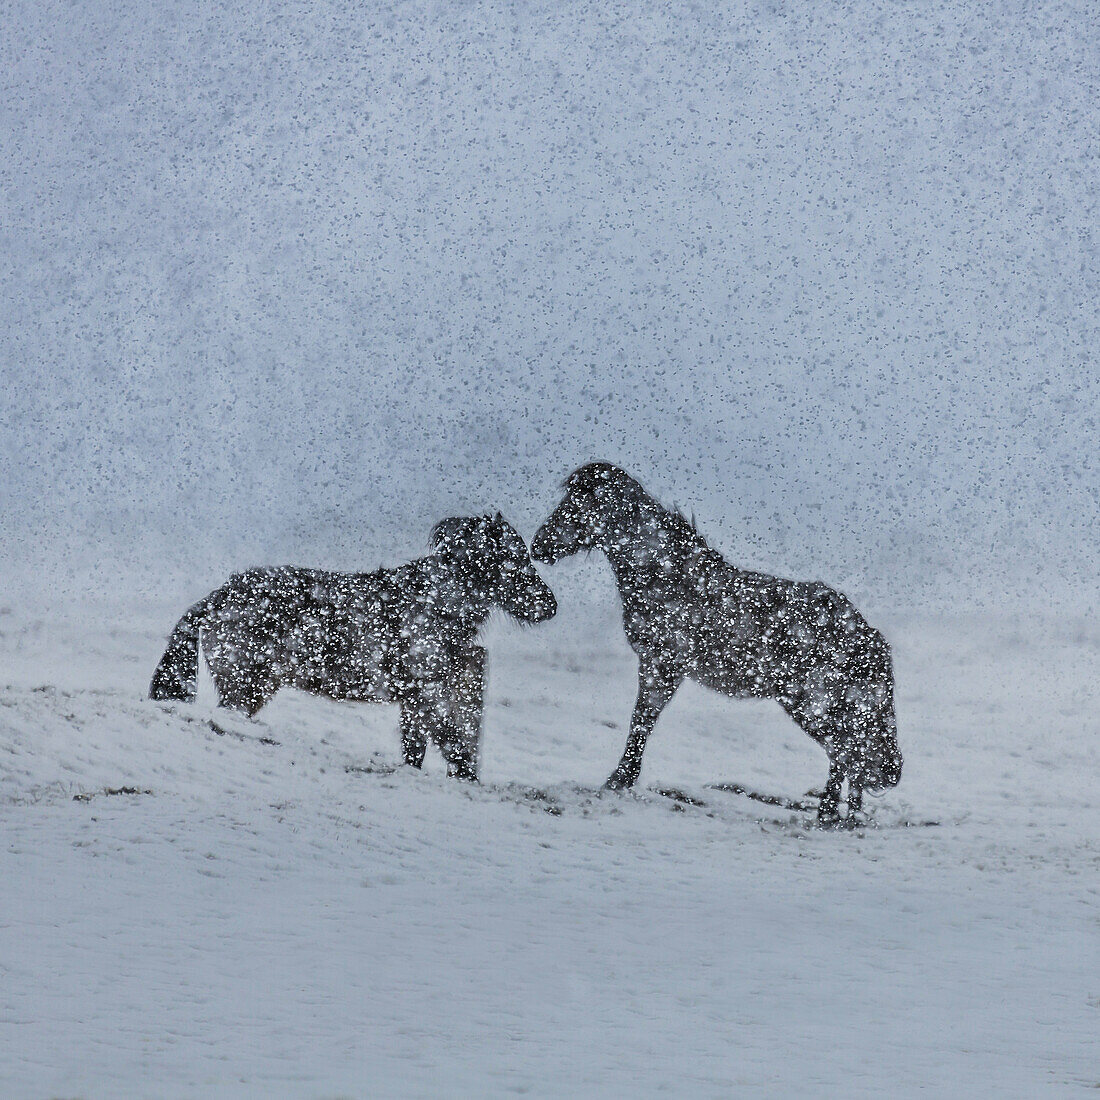 Icelandic Horses in a snowstorm, Iceland.